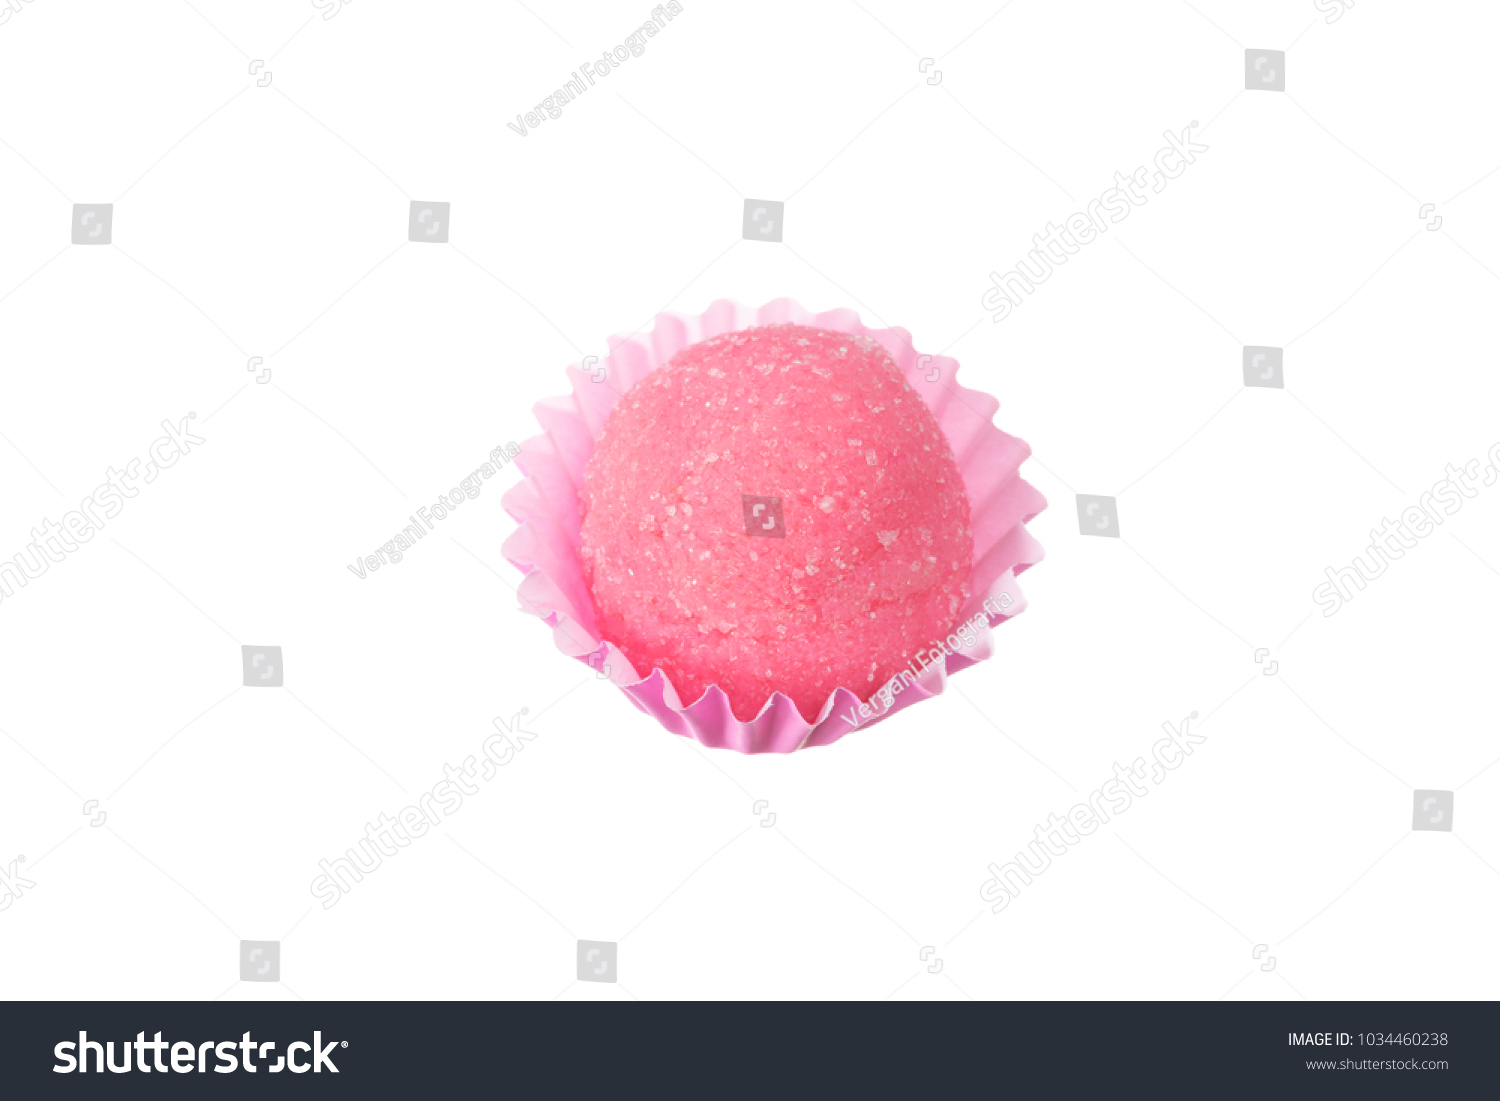 Bicho de pe is a strawberry flovoured brazilian candy. Common in children birthday parties sweet. Overhead of candy ball in white background. #1034460238